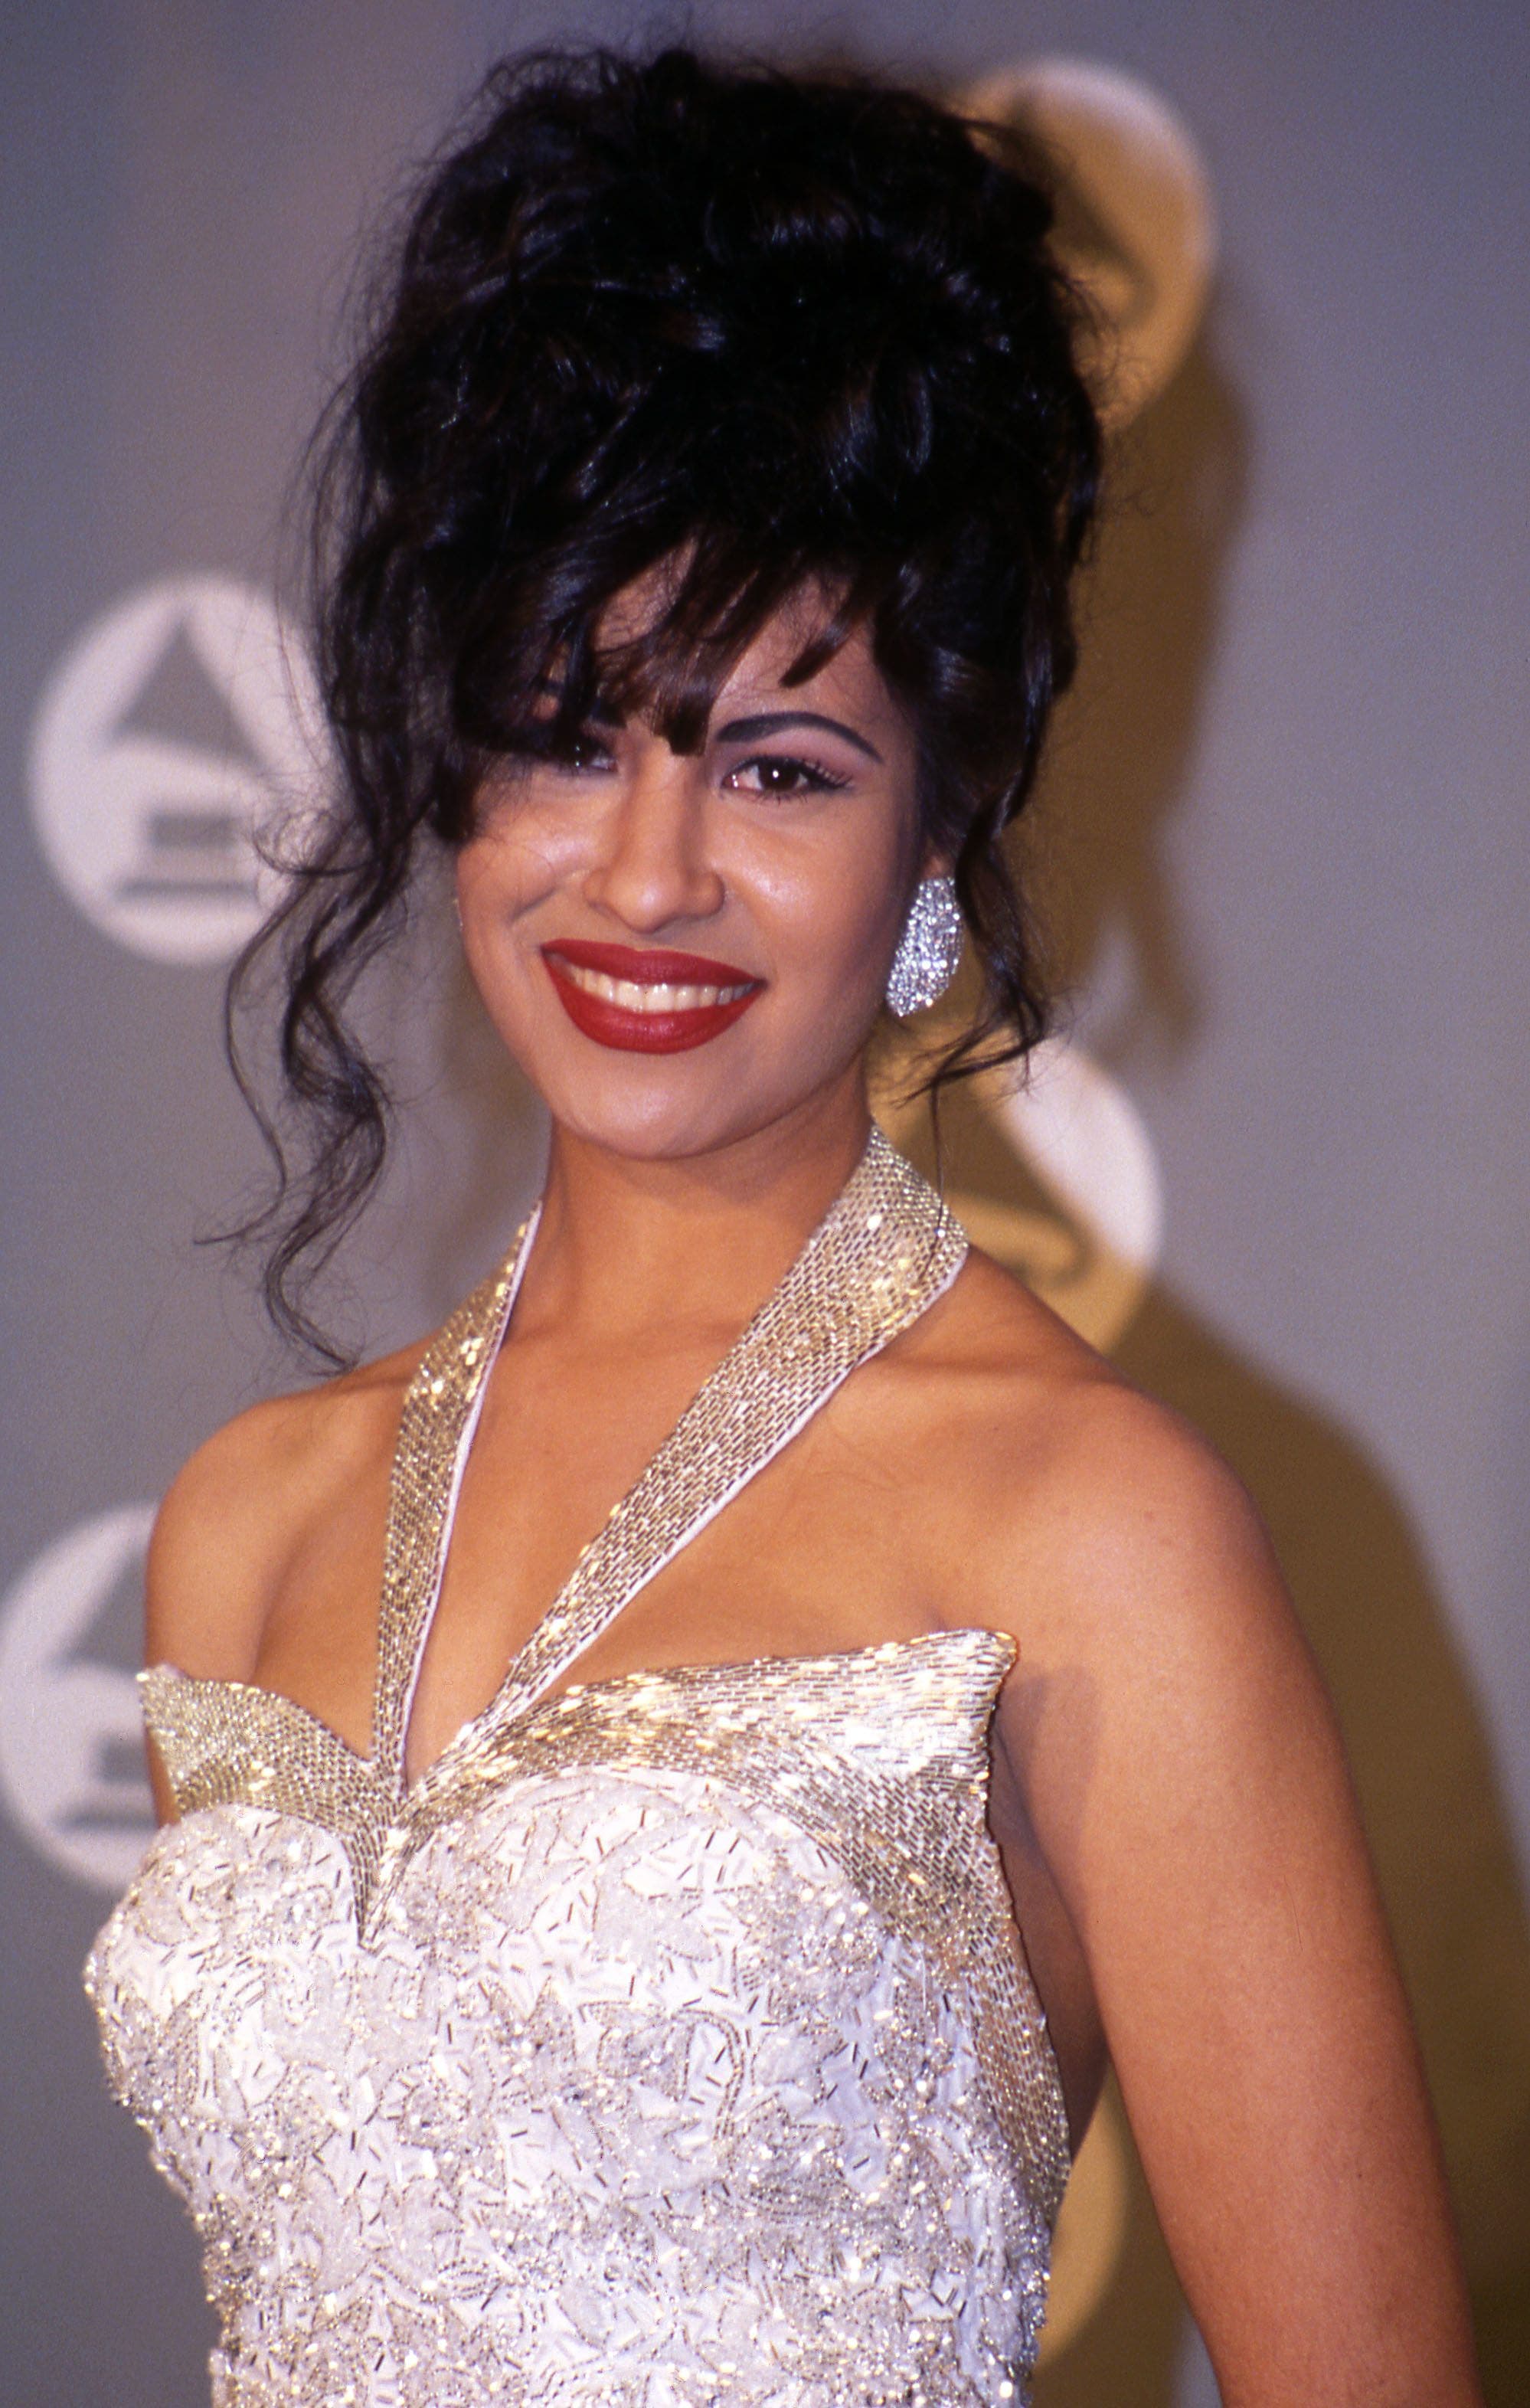 Twenty years after Selena’s murder, fans remember ‘The Queen of Tejano’